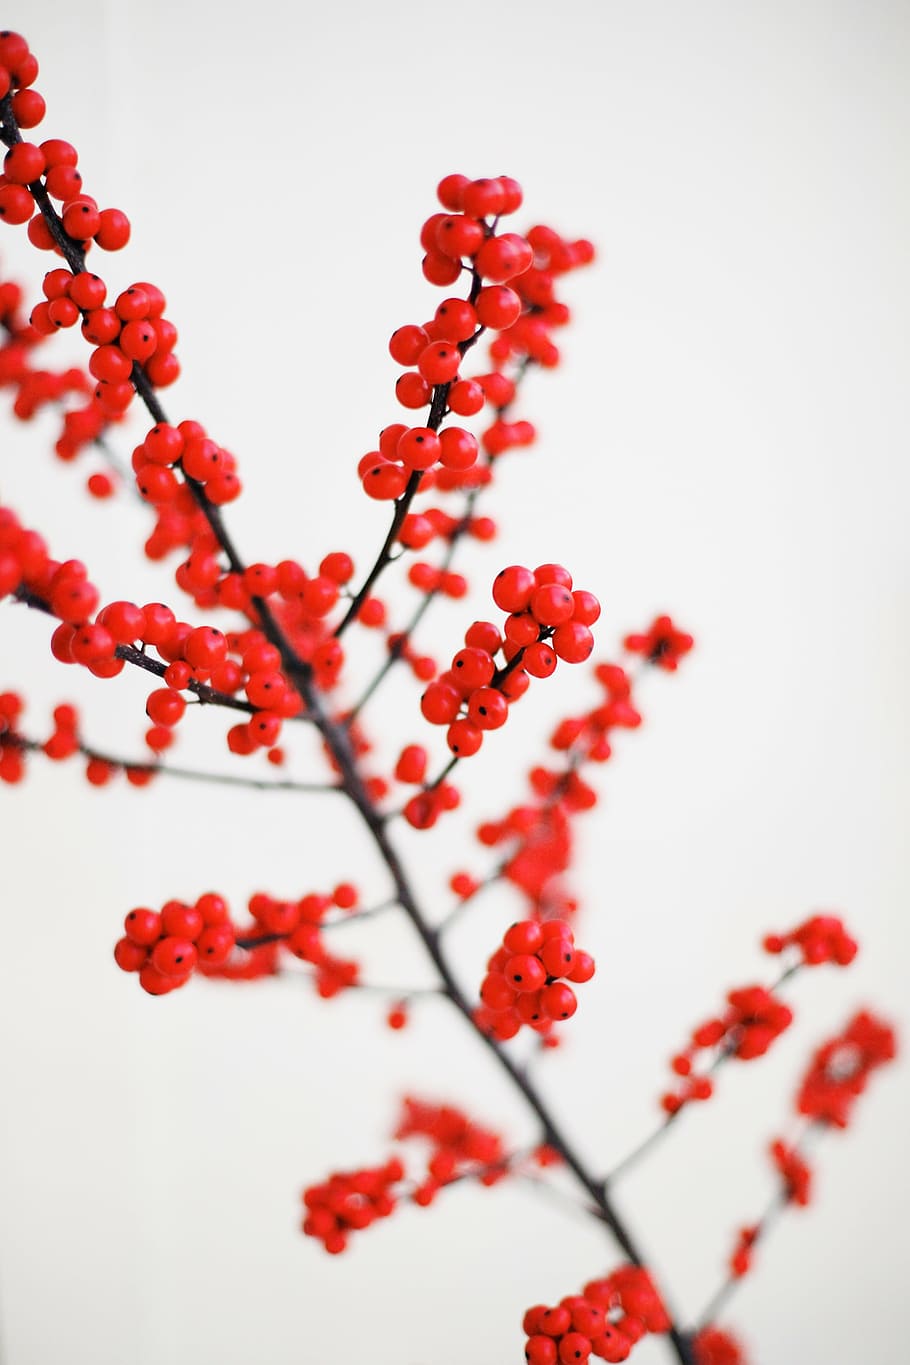 shallow, focus photography, red, cherries, holly, plant, christmas, holiday, branch, nature